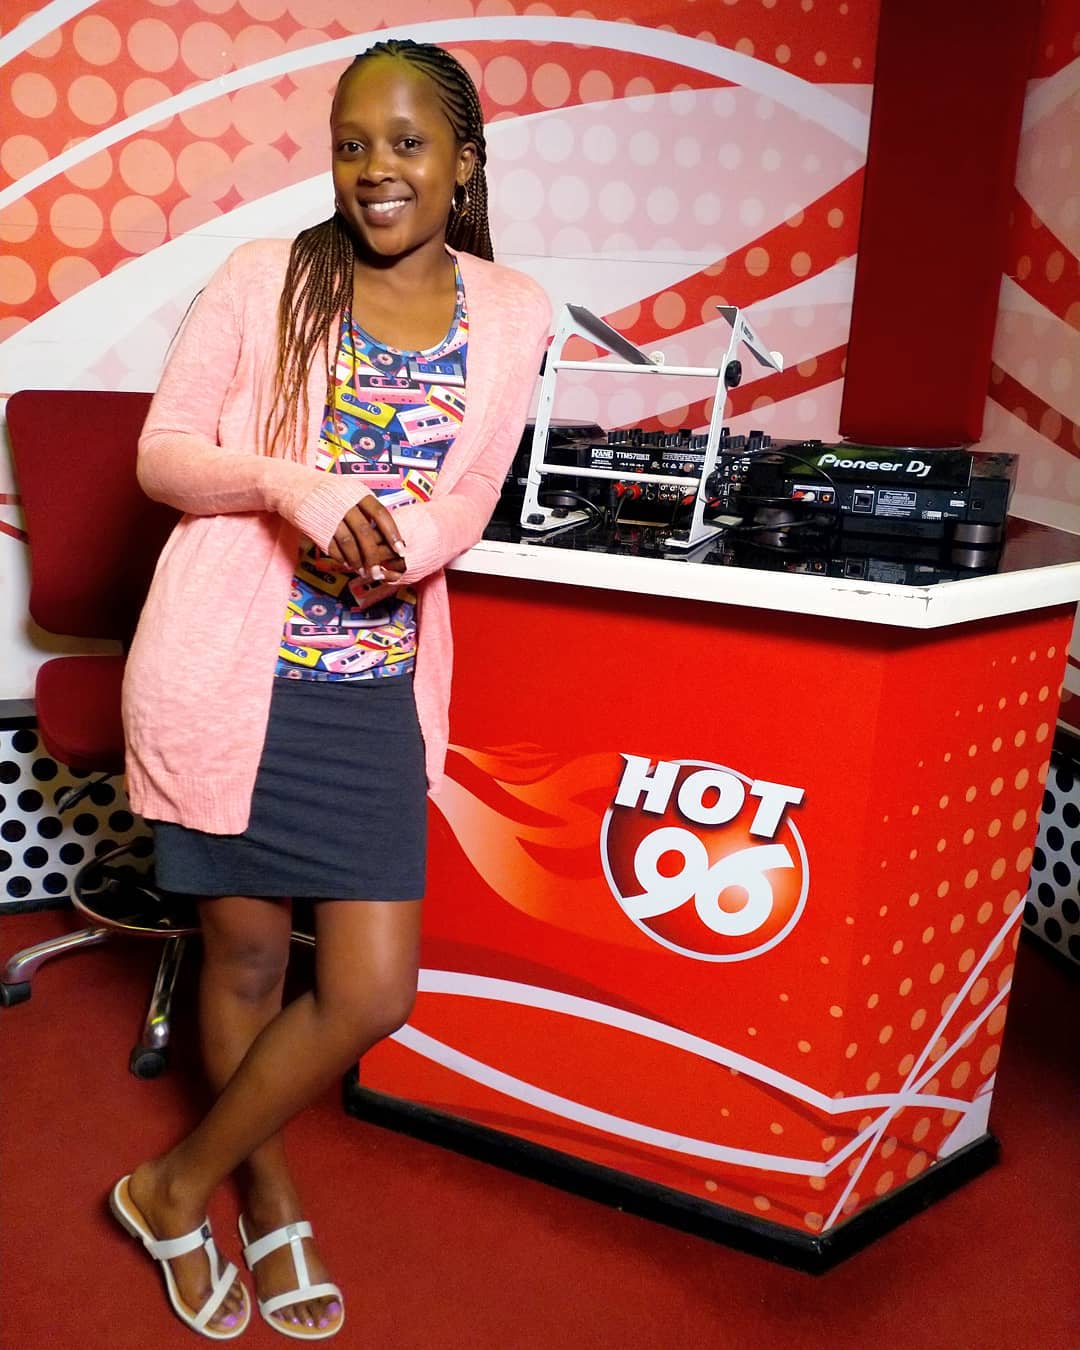 2018-09-15-Shix Kapienga: Is Cute And All While Posing Next To The Decks At Hot 96 FM Studio In Kellywood, Where Is MC Jesse?